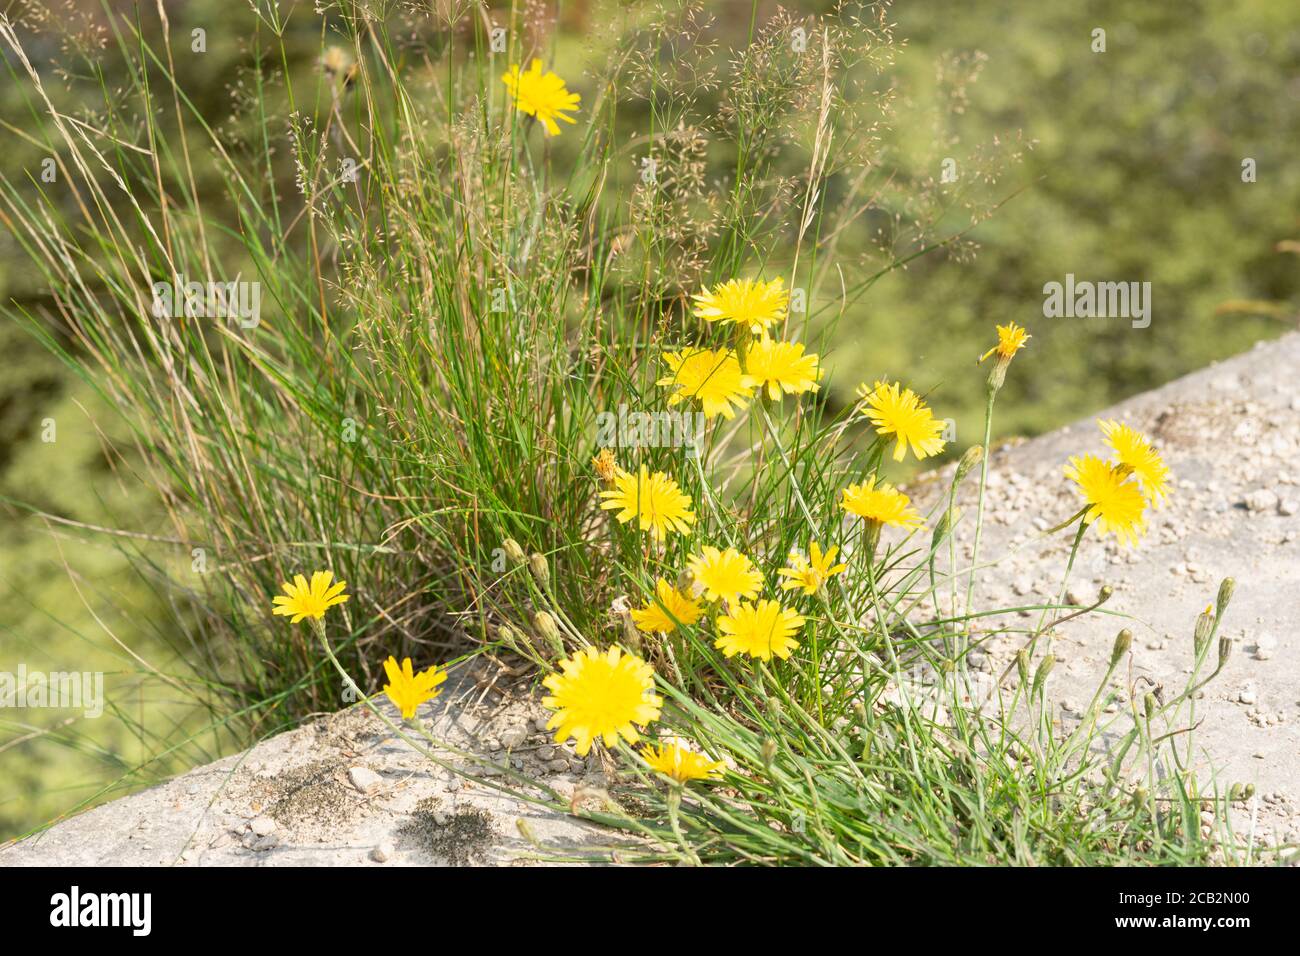 Hawkweed flowers (Hieracium, hierakion), part of the Asteraceae family, sometimes confused with dandelion, growing at the side of a canal. England, UK Stock Photo